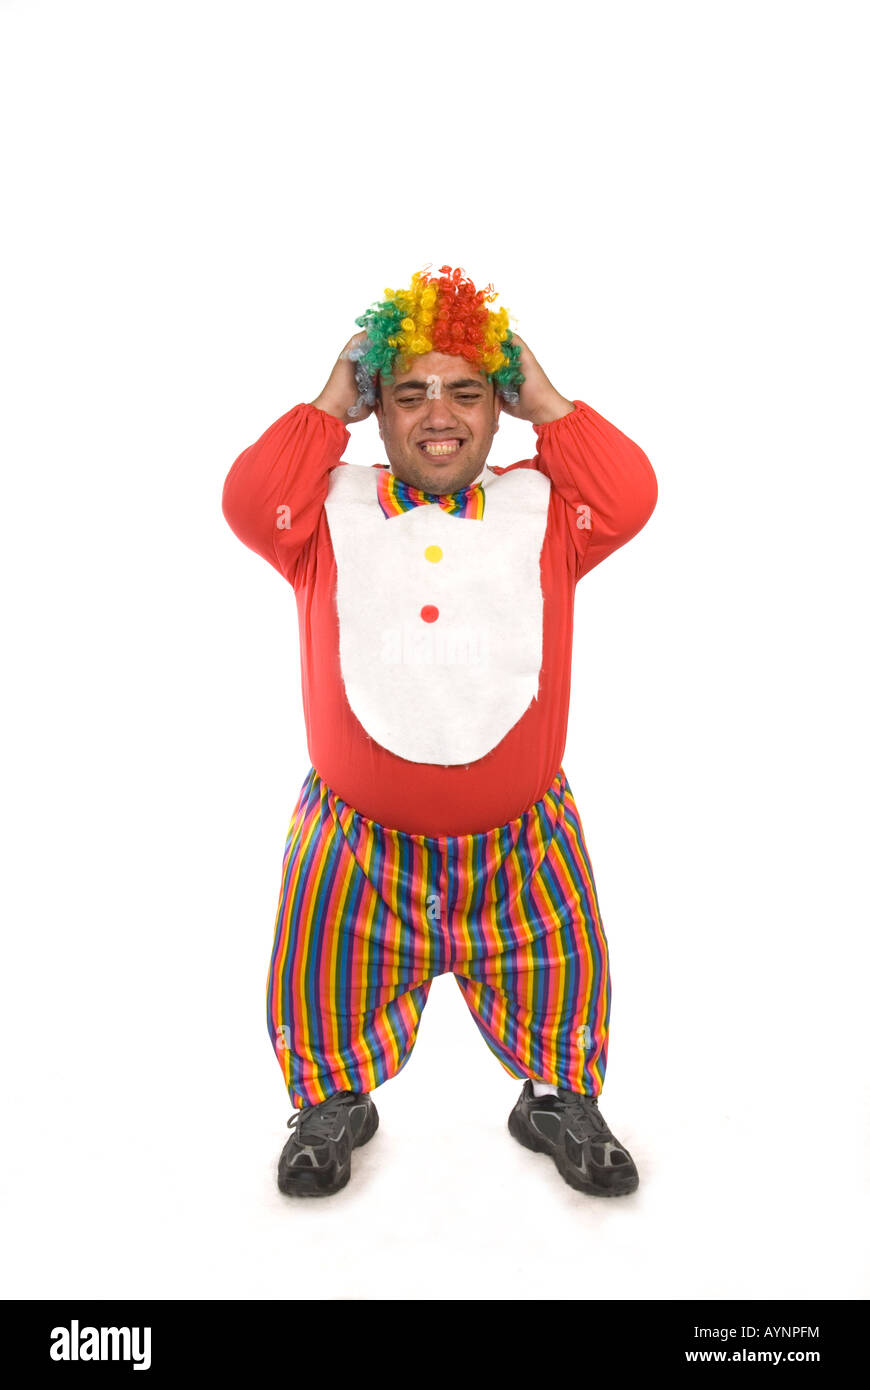 Full length portrait of an annoyed midget clown against a white background Stock Photo